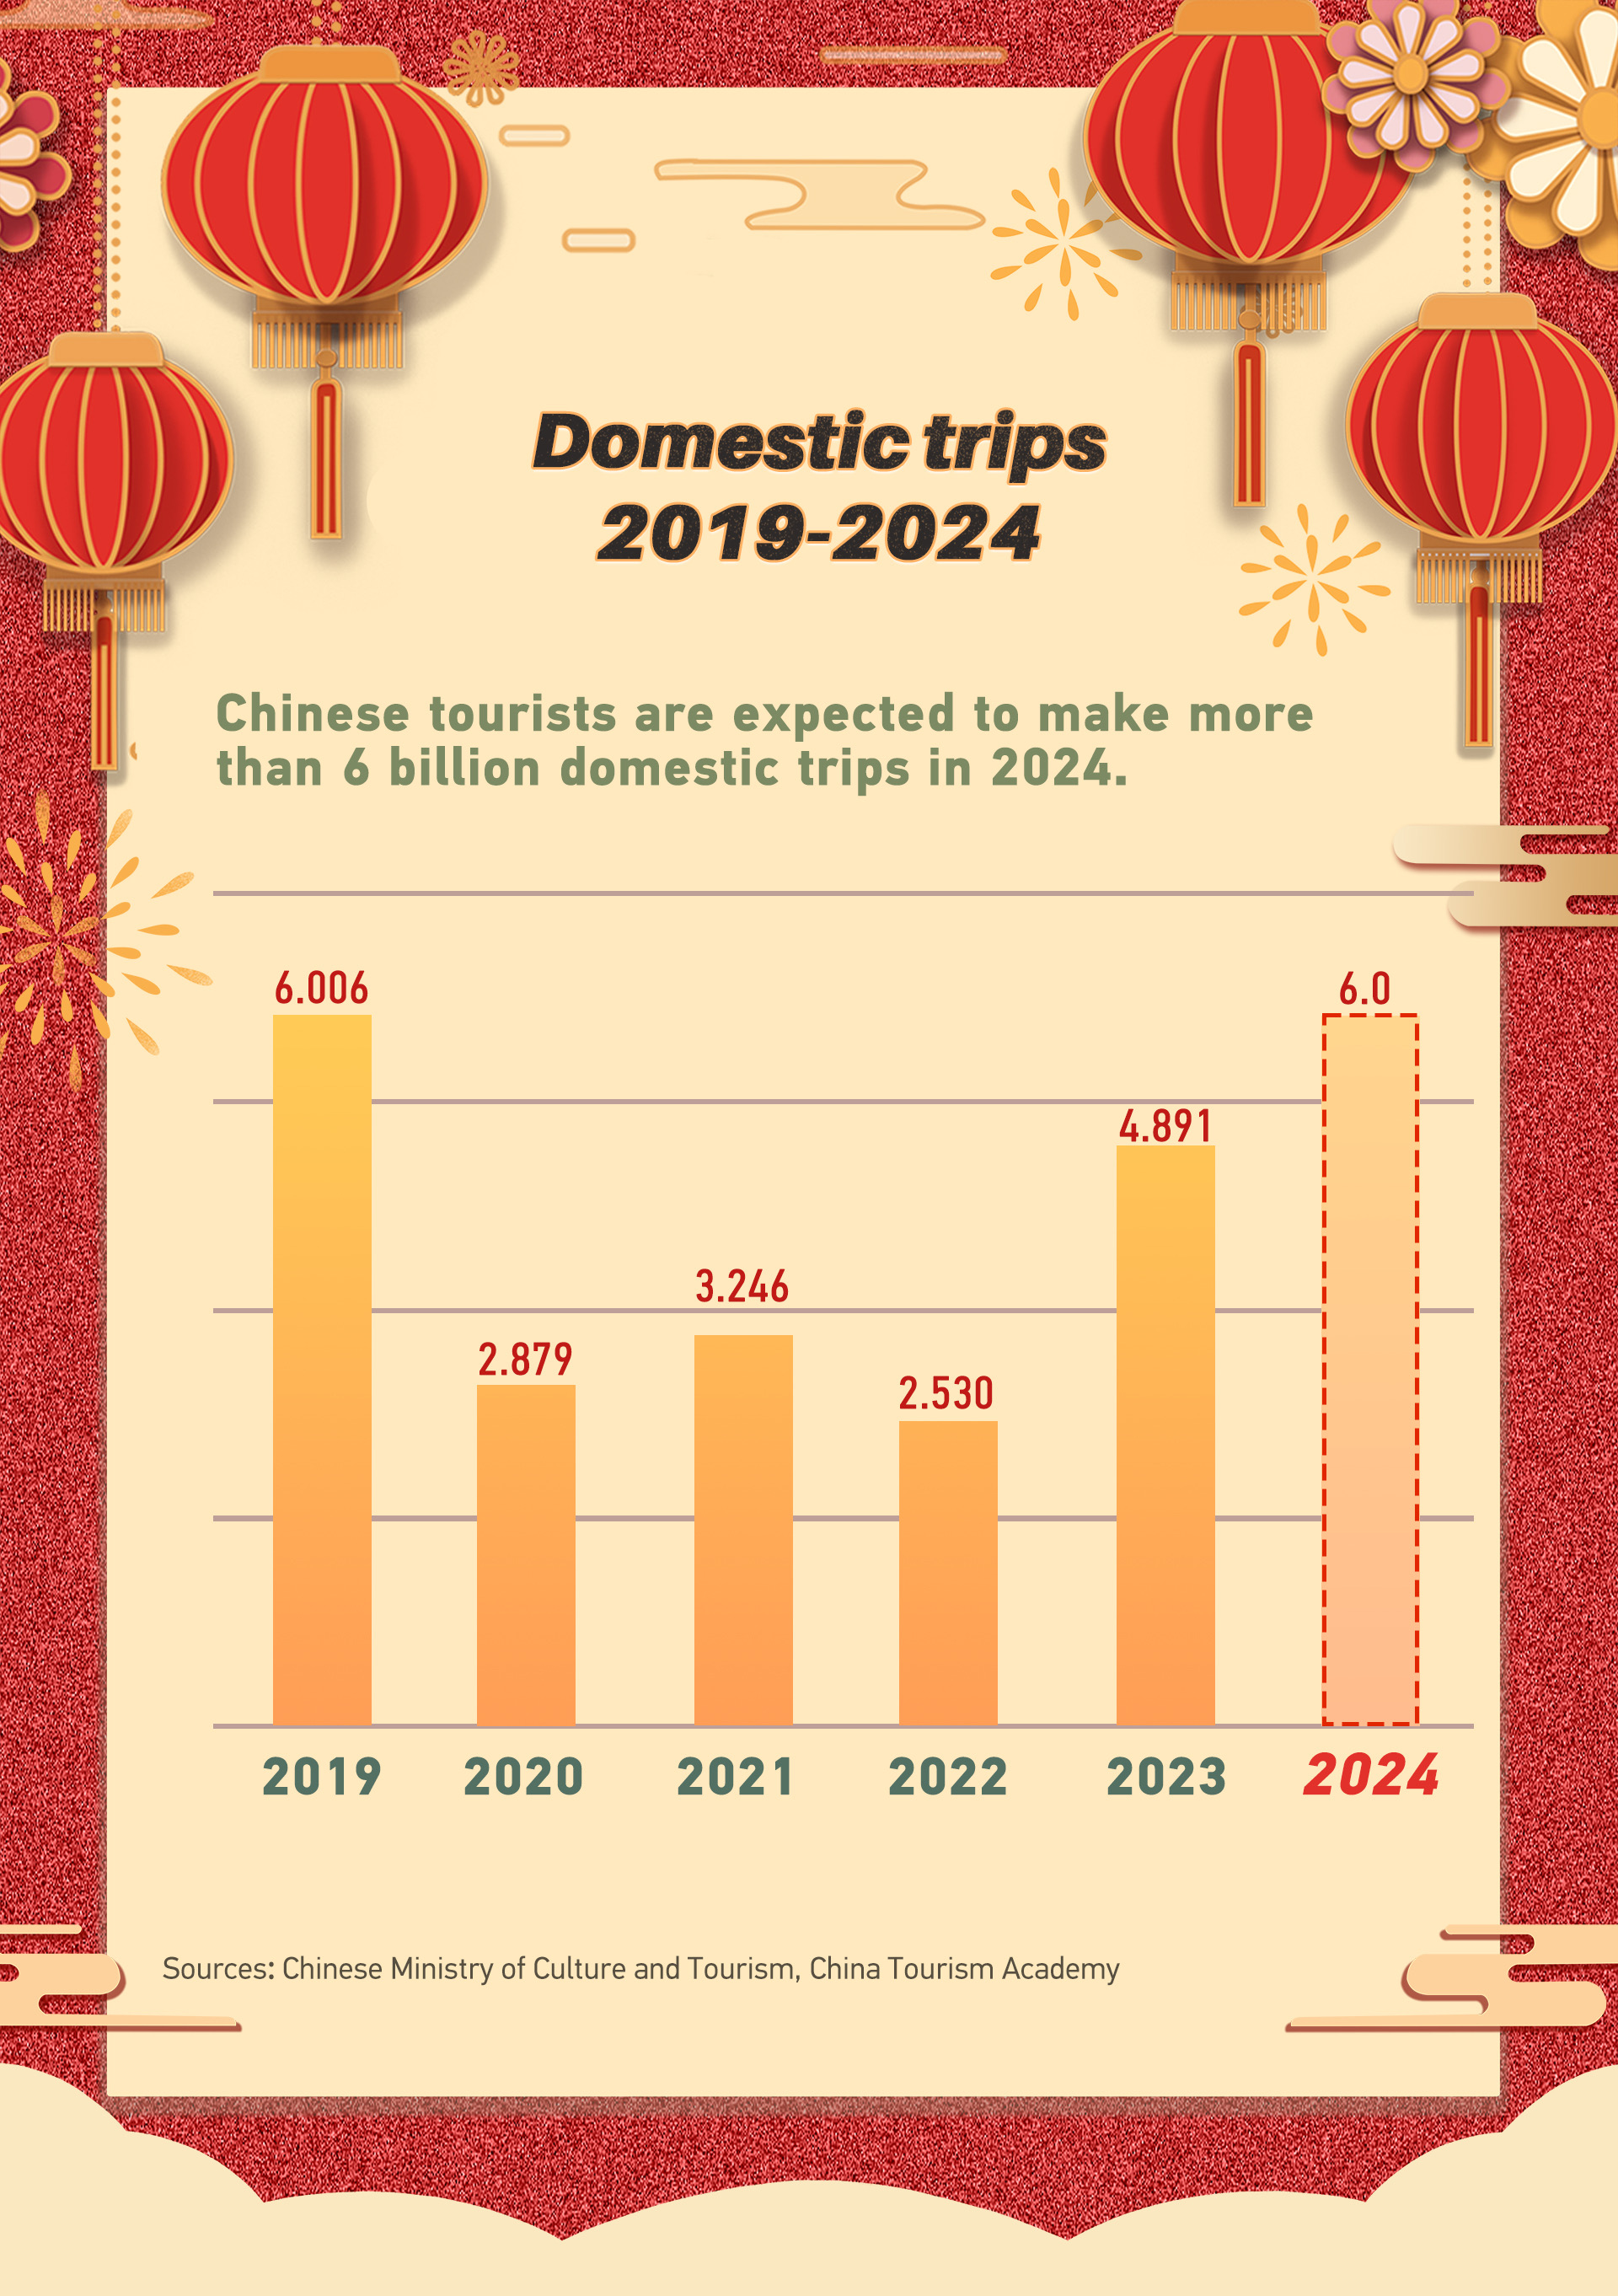 Spring Festival travel surge sets promising tone for Chinese tourism